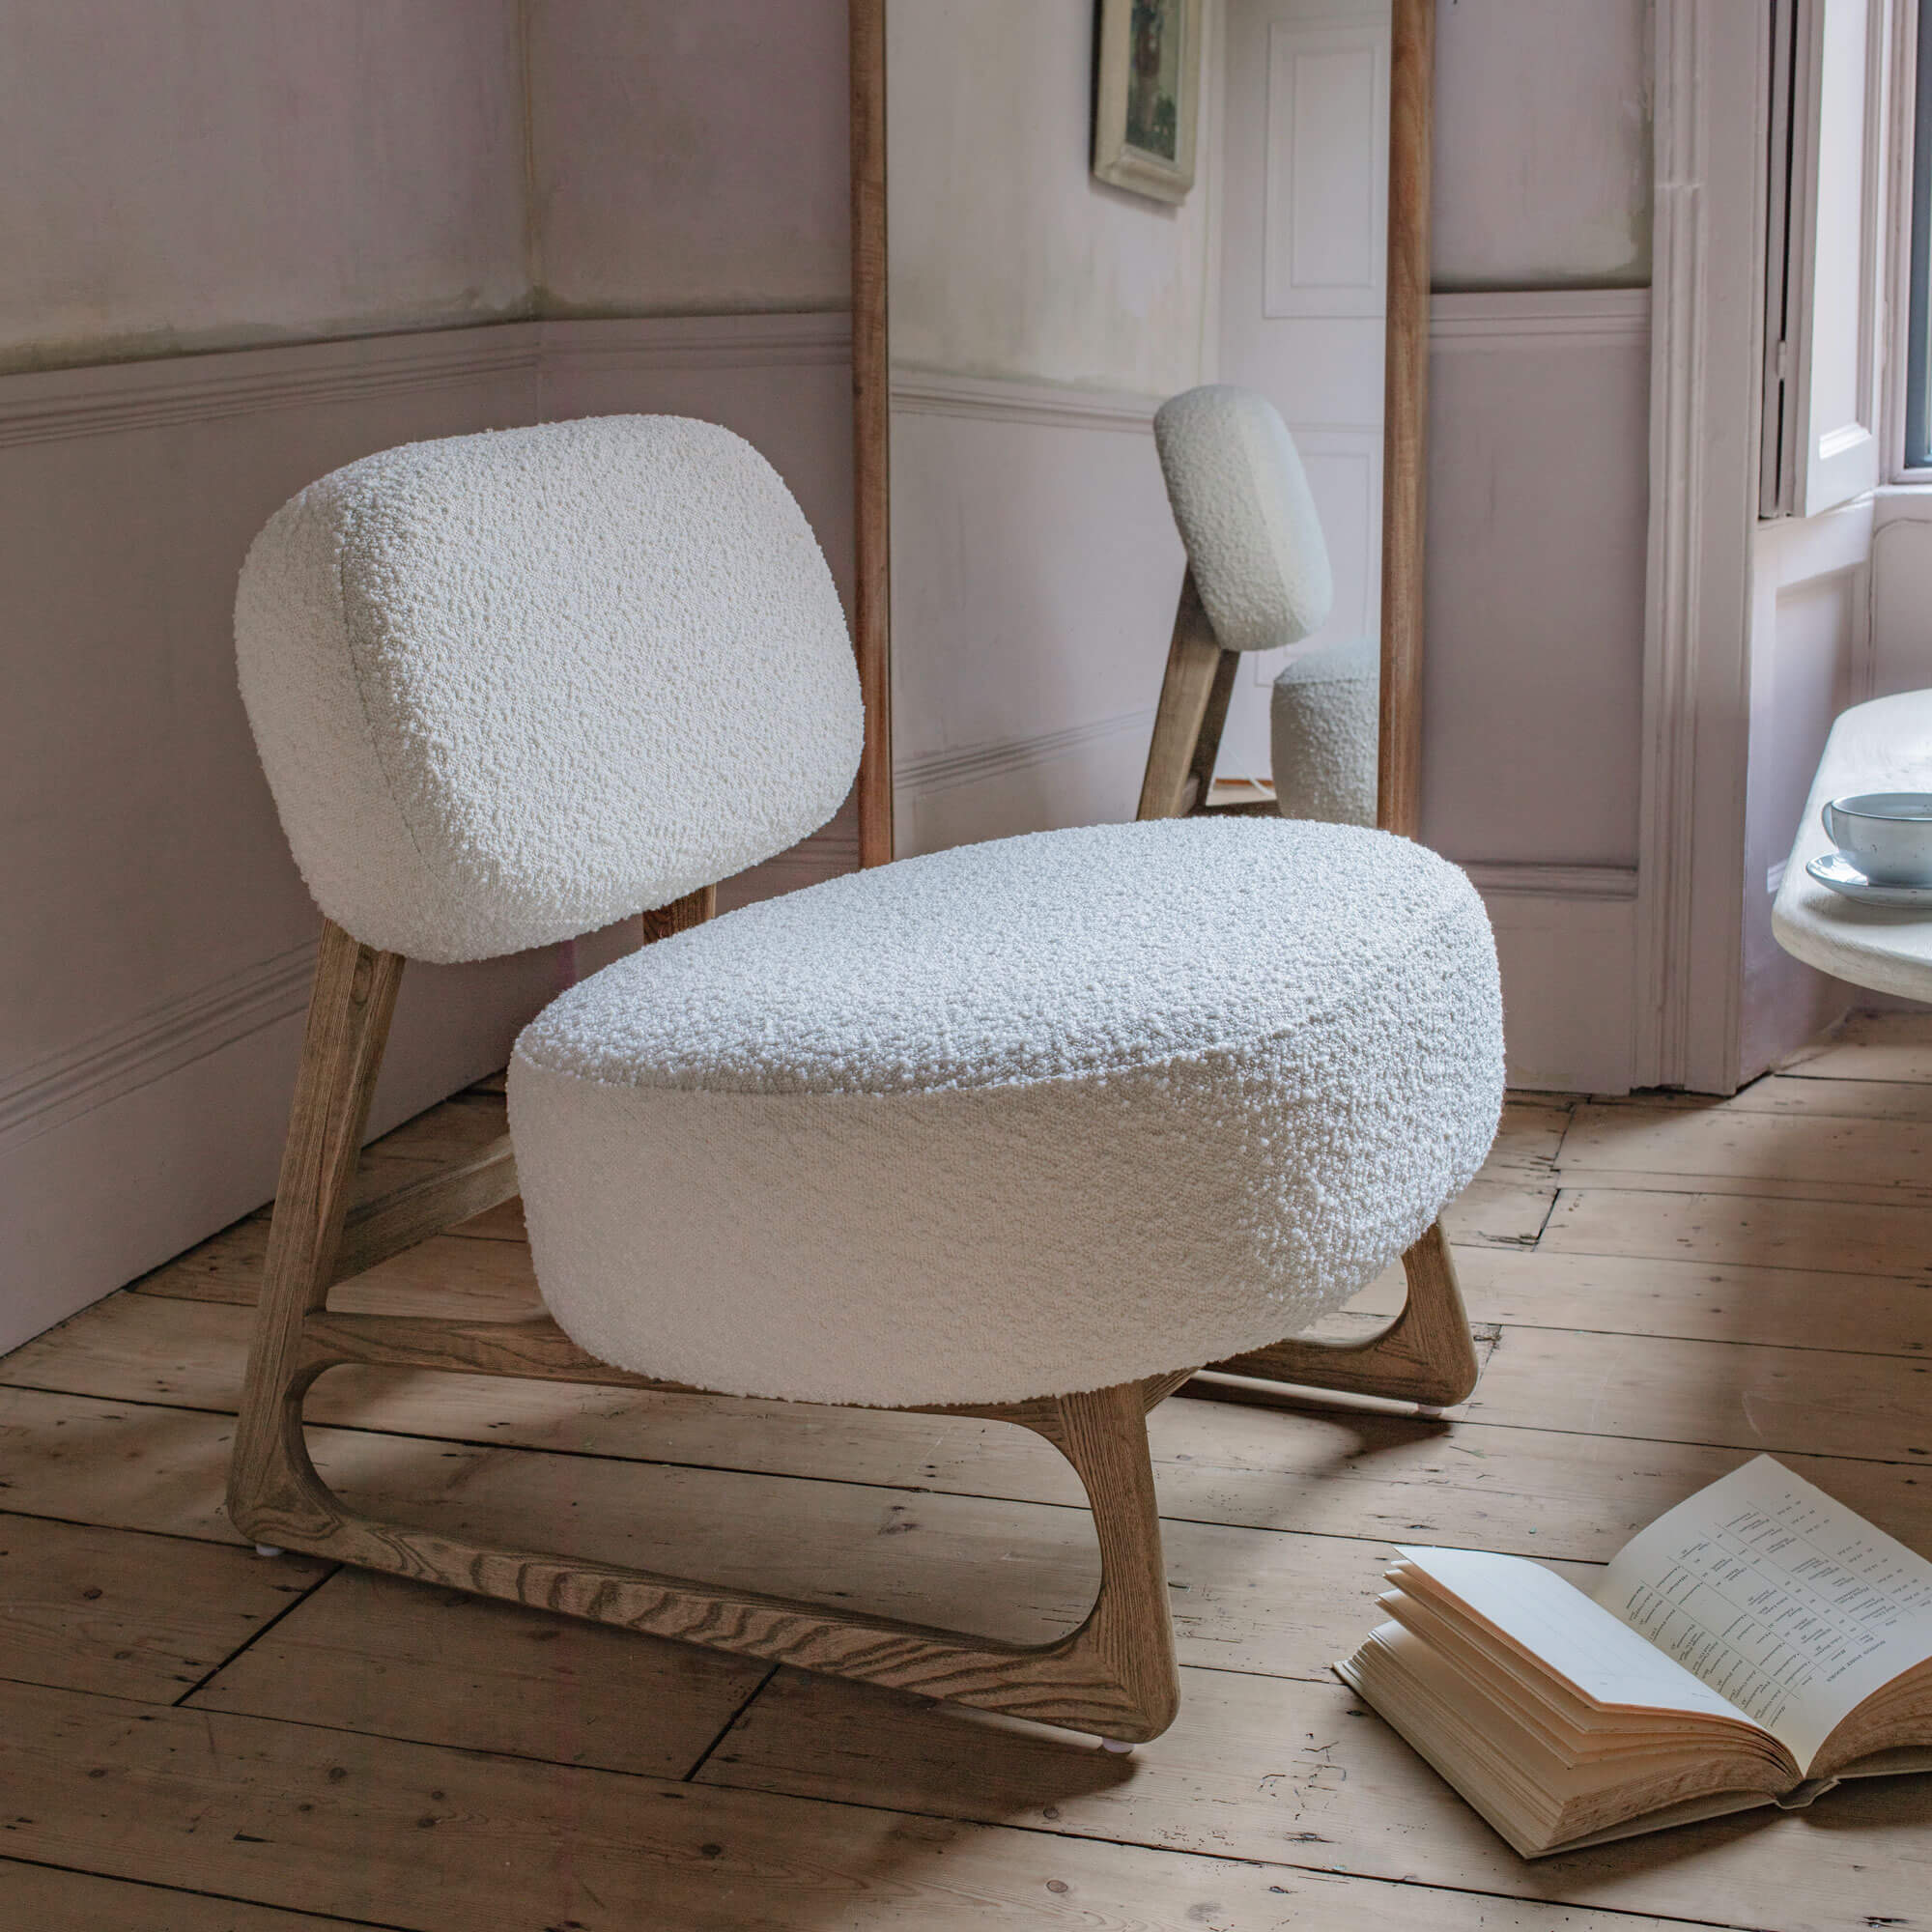 Read more about Graham and green emilie chair